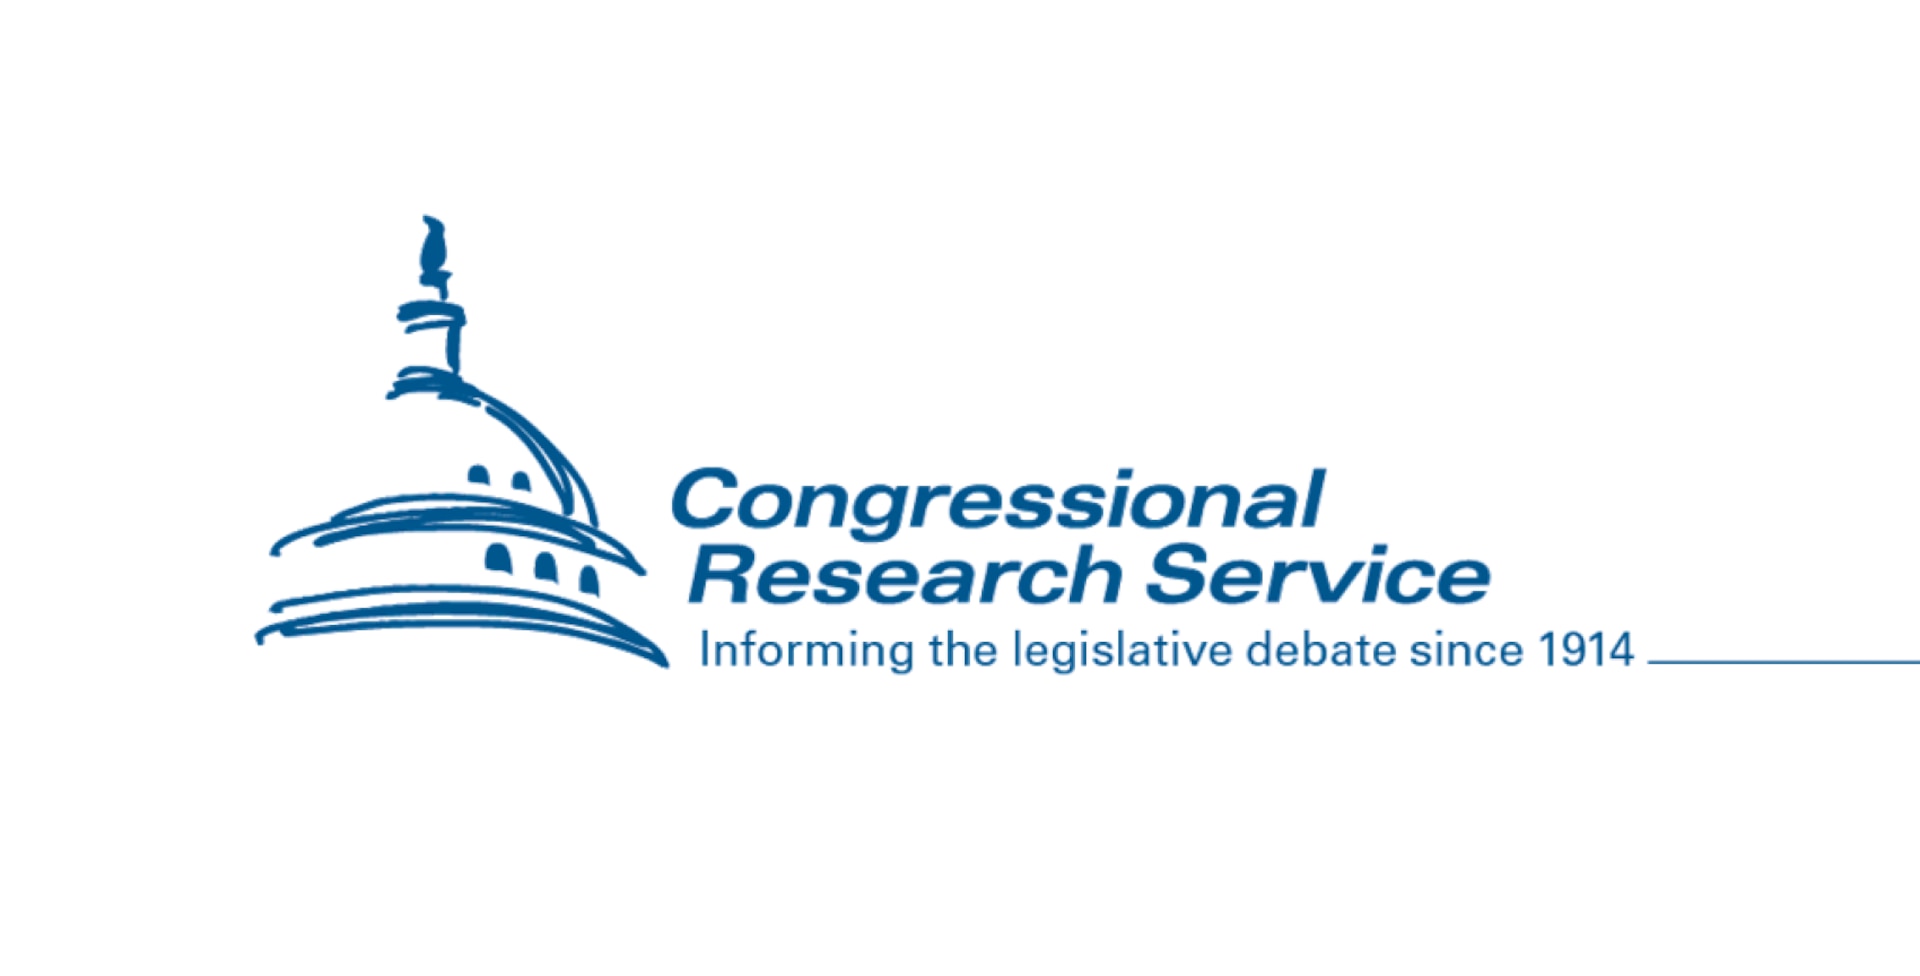 congressional research service (crs) report in july 2020